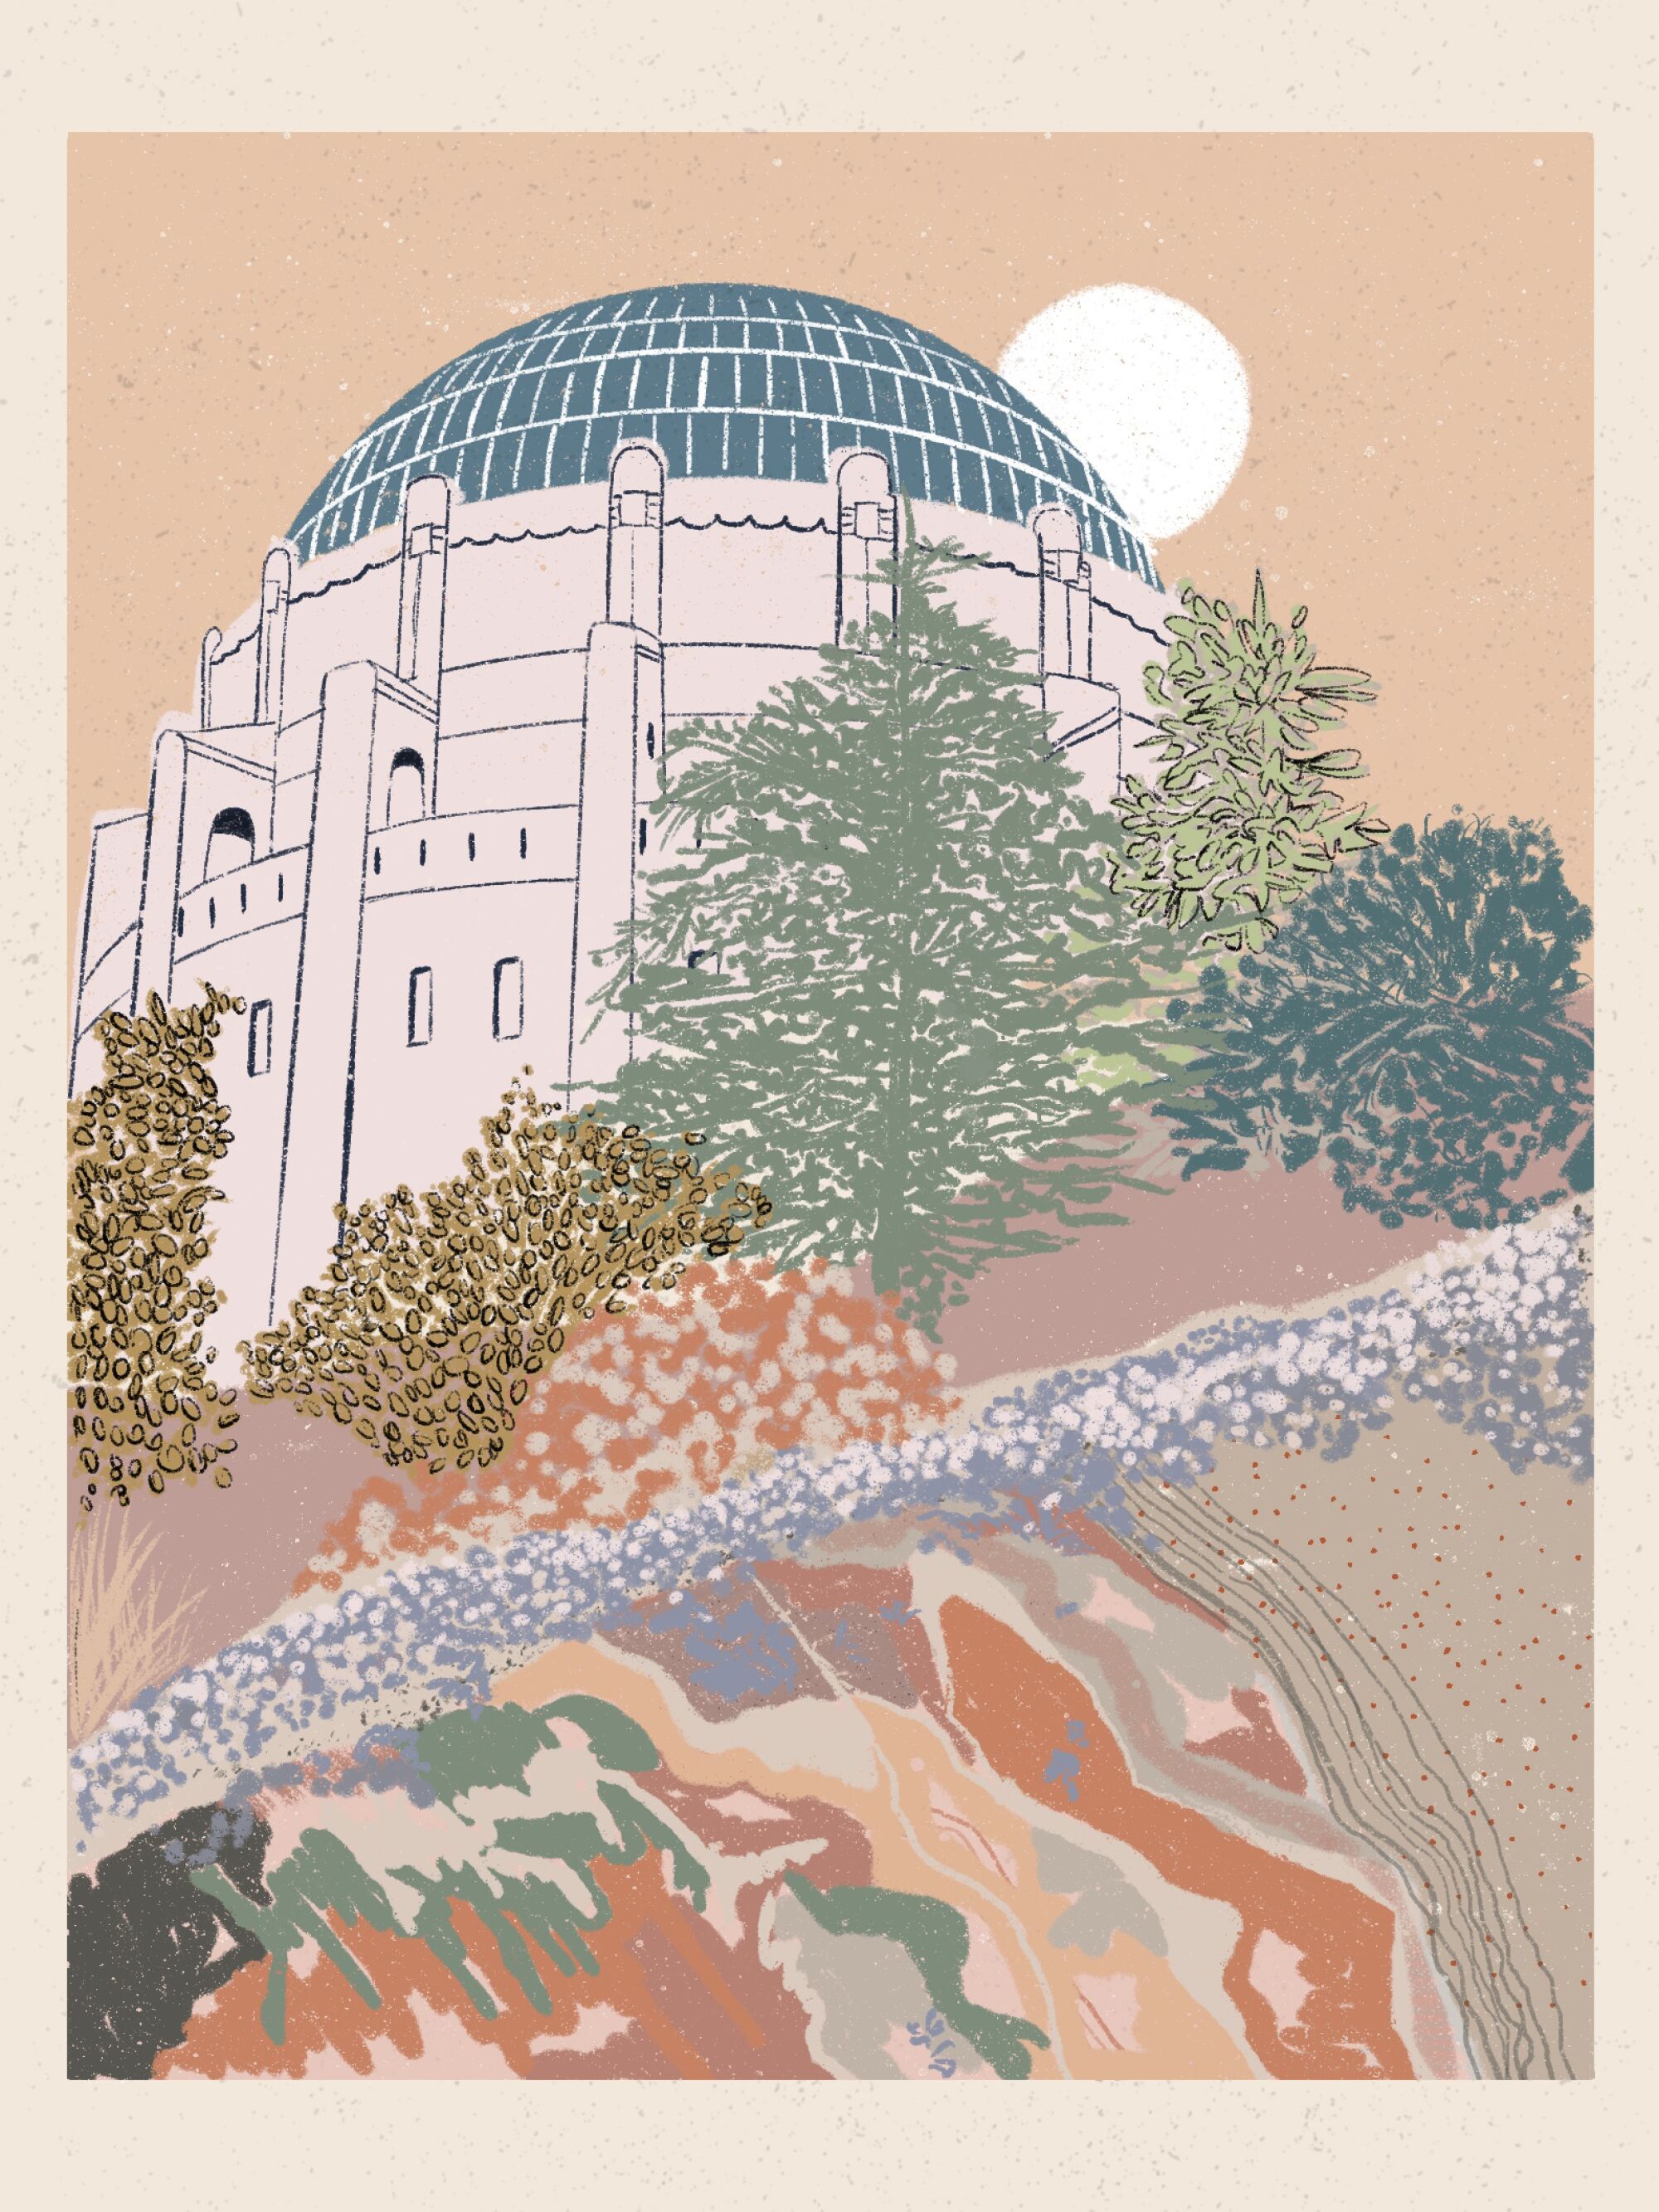 Walker Noble's limited edition signed print on museum grade watercolor paper captures the Art Deco landmark.